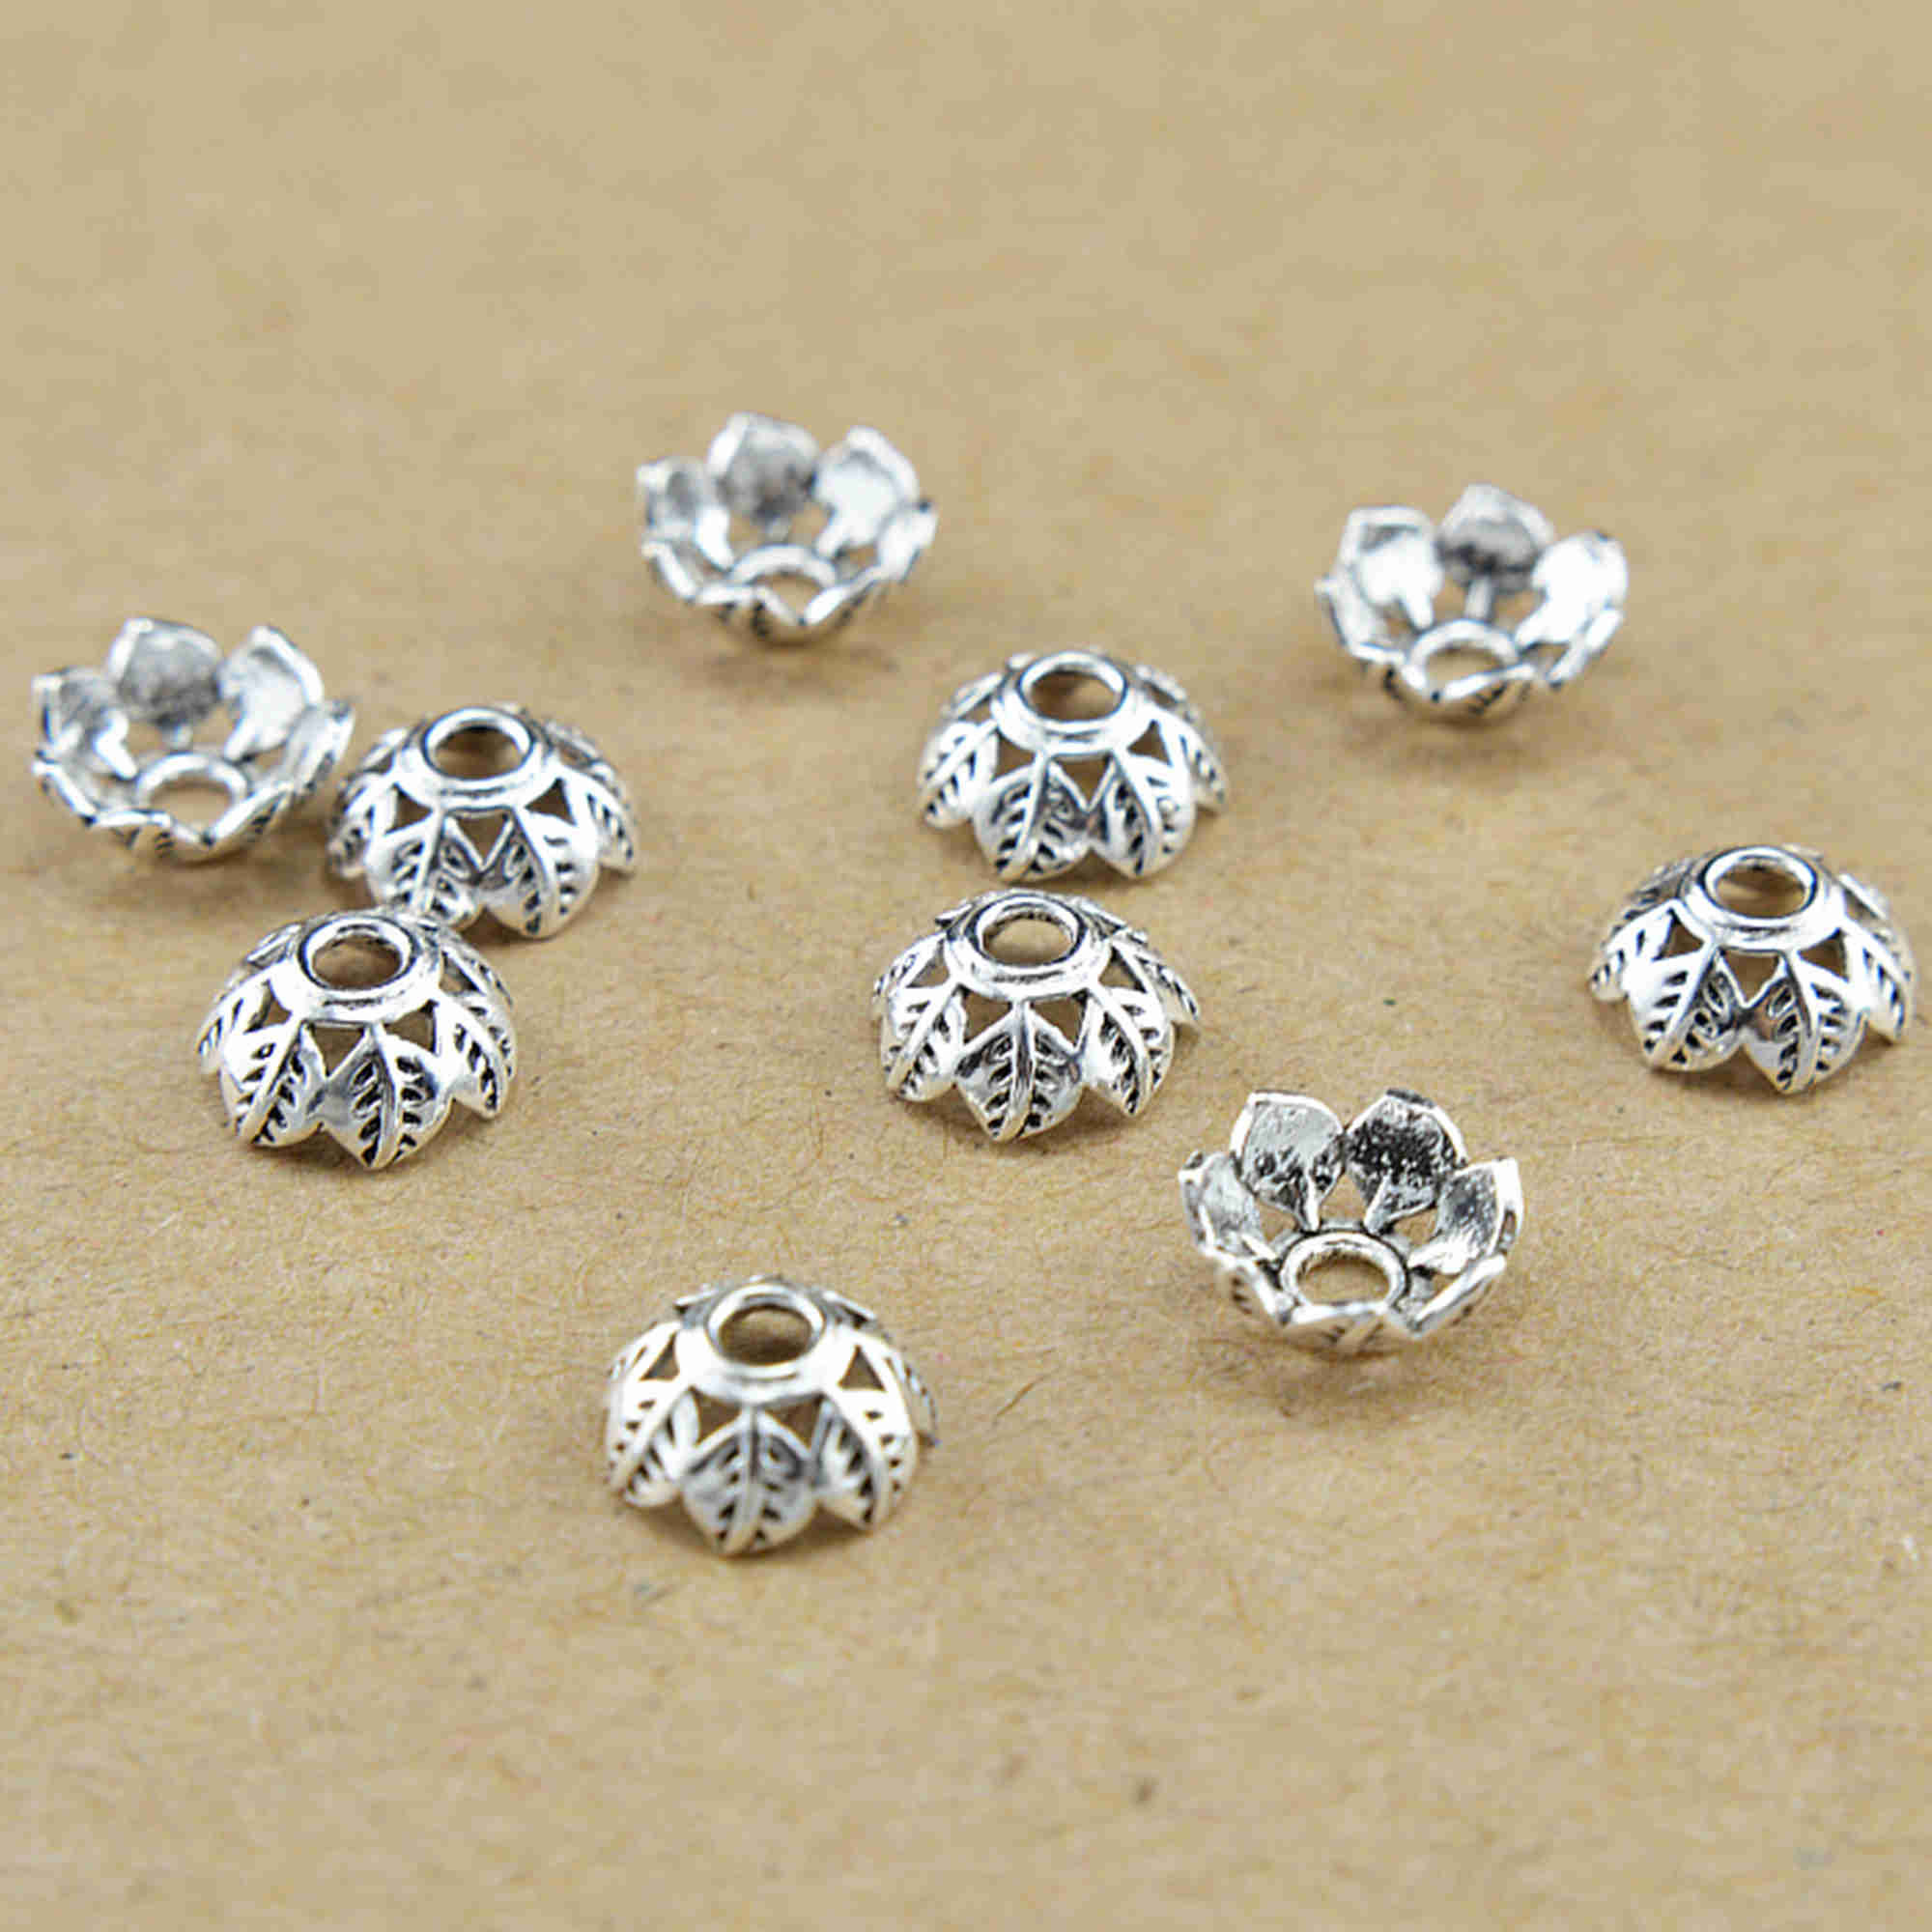 Sterling Silver Bead Caps Flower Bead Caps 10mm s925 Silver Beads Cap For Jewelry Making Supplies Bracelet Beads Cap